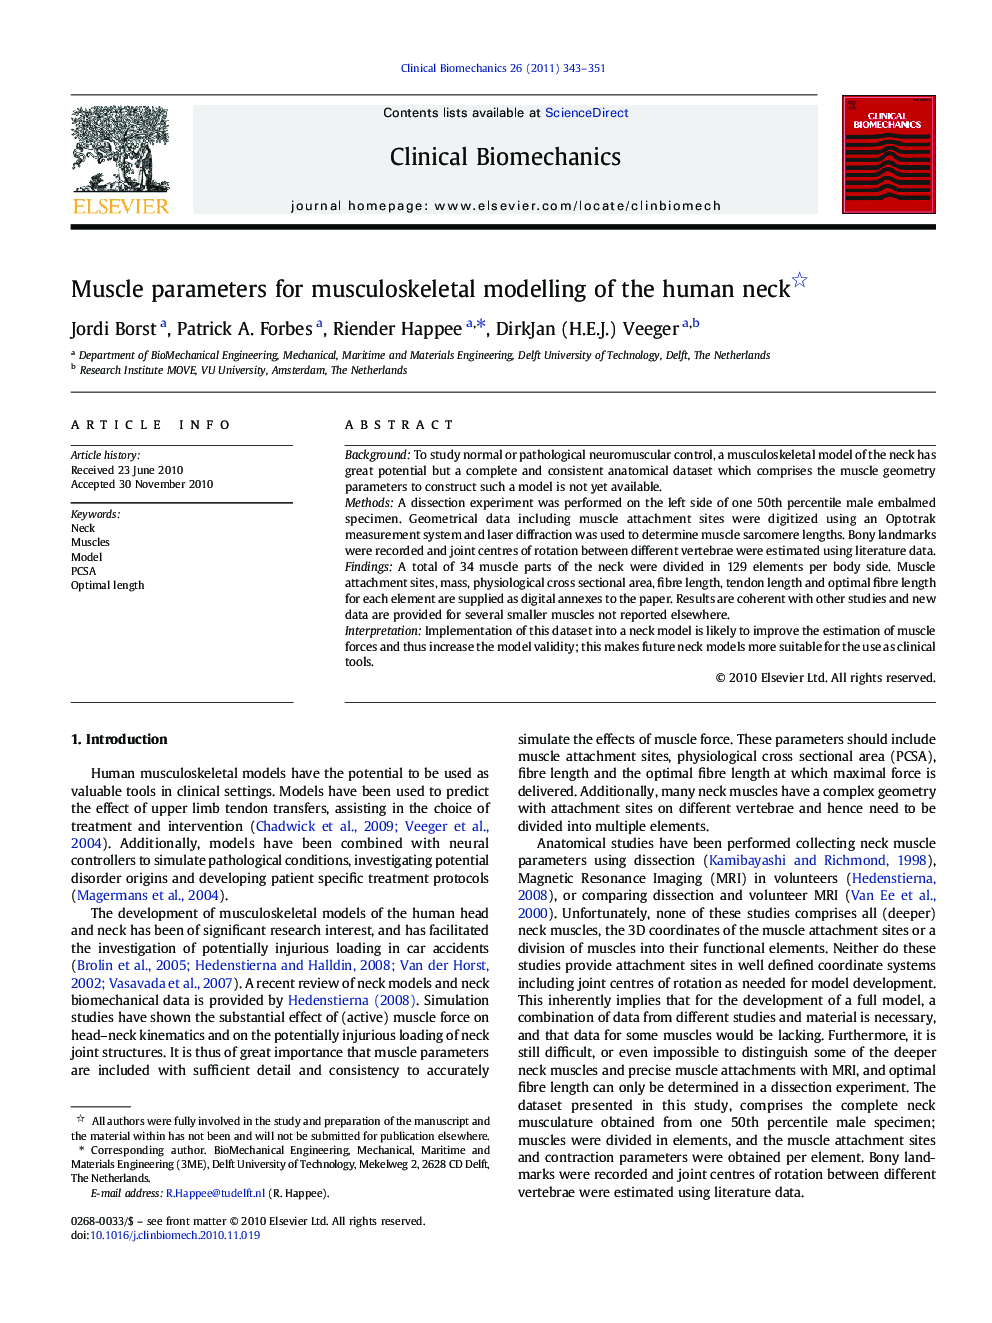 Muscle parameters for musculoskeletal modelling of the human neck 